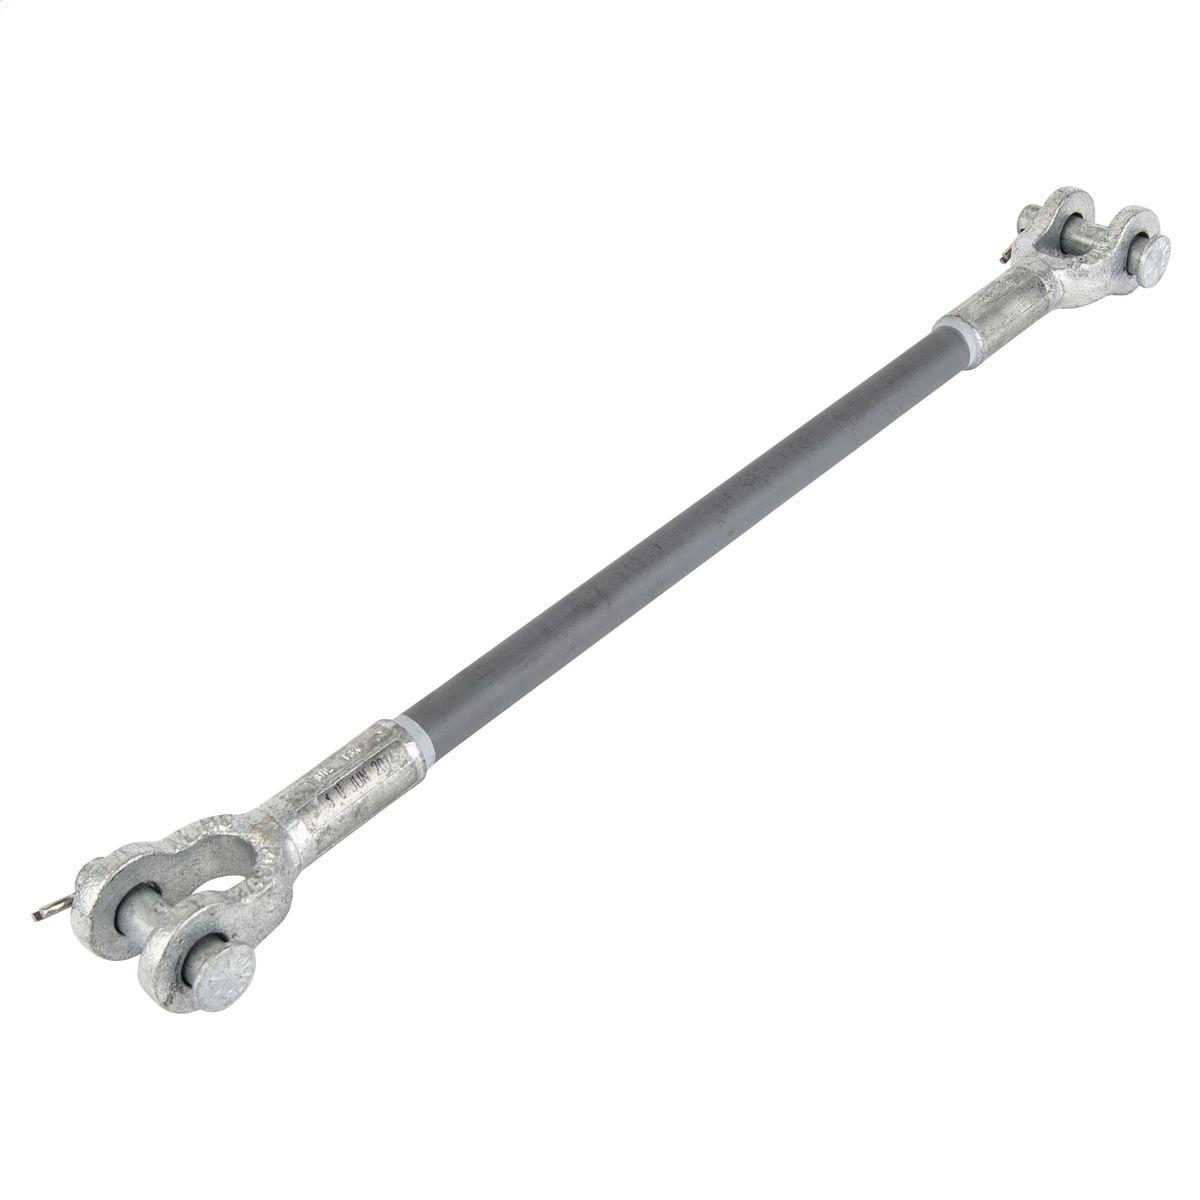 Hubbell GS36018CCSC 18" Silicone Coated Fiberglass Guy Strain; 36,000 lb Series; Clevis / Clevis 